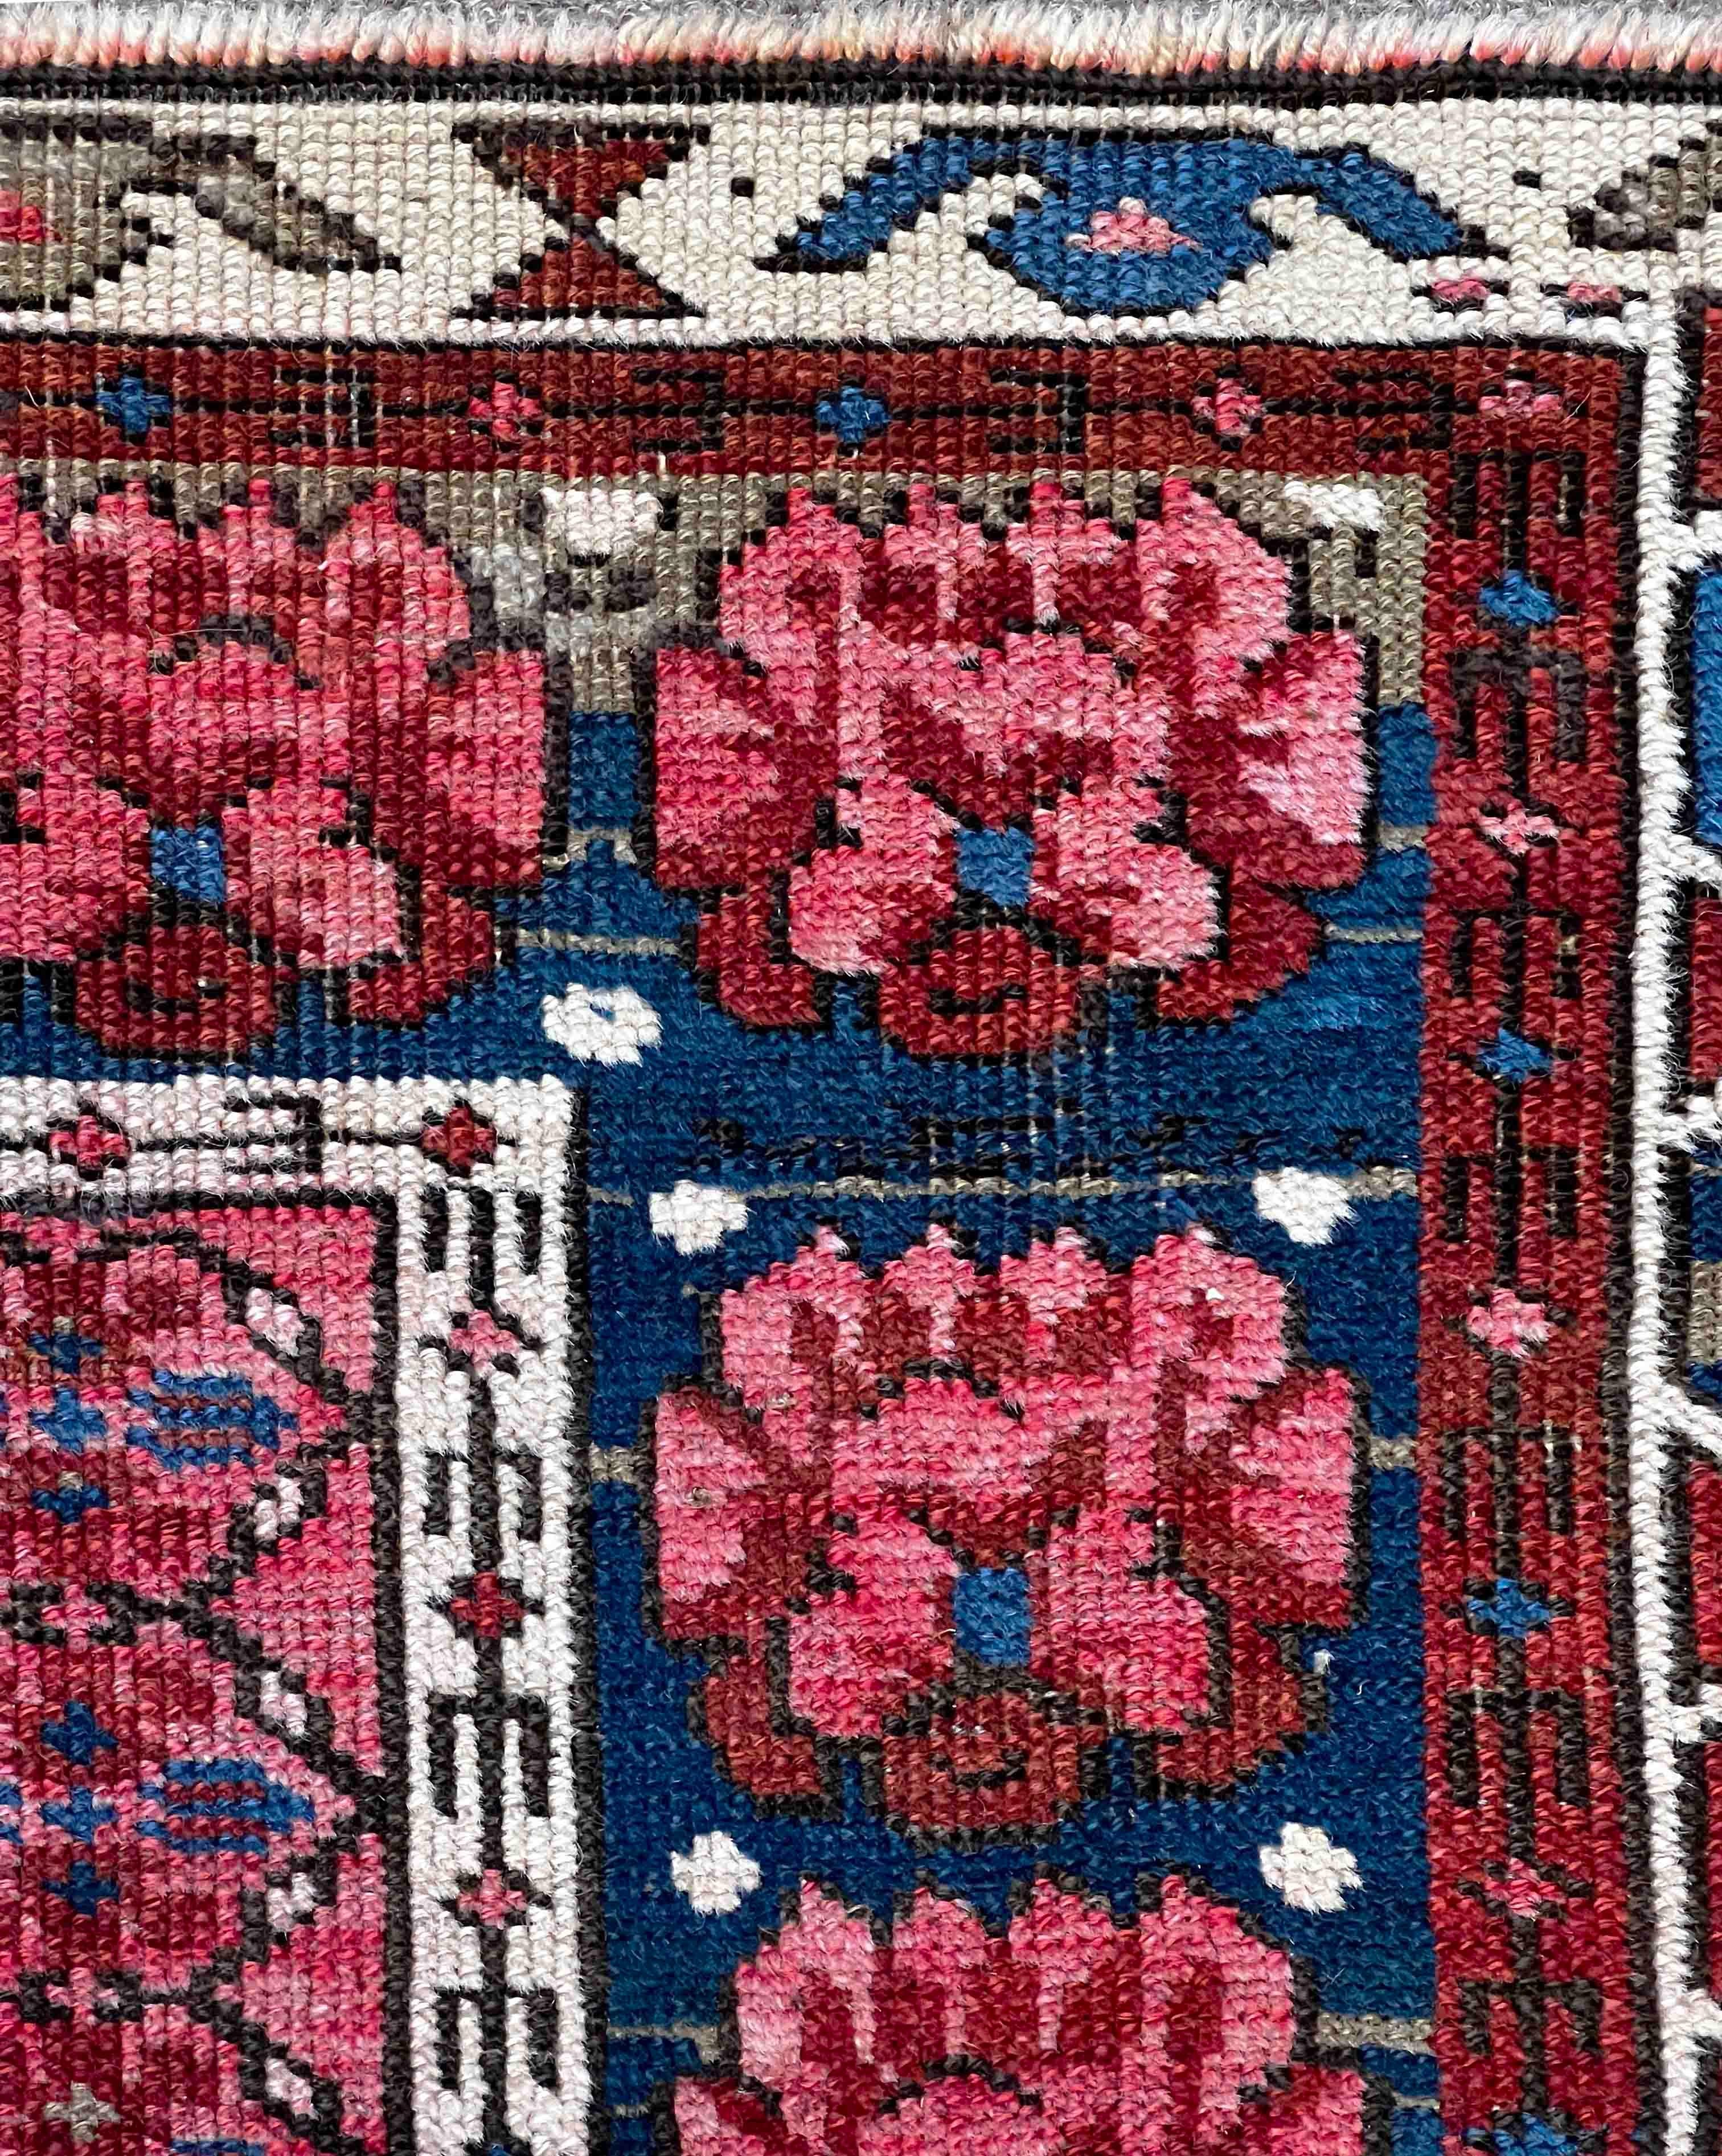  Important Seikhour Rug from Russia , 19th Century - N° 640 For Sale 2